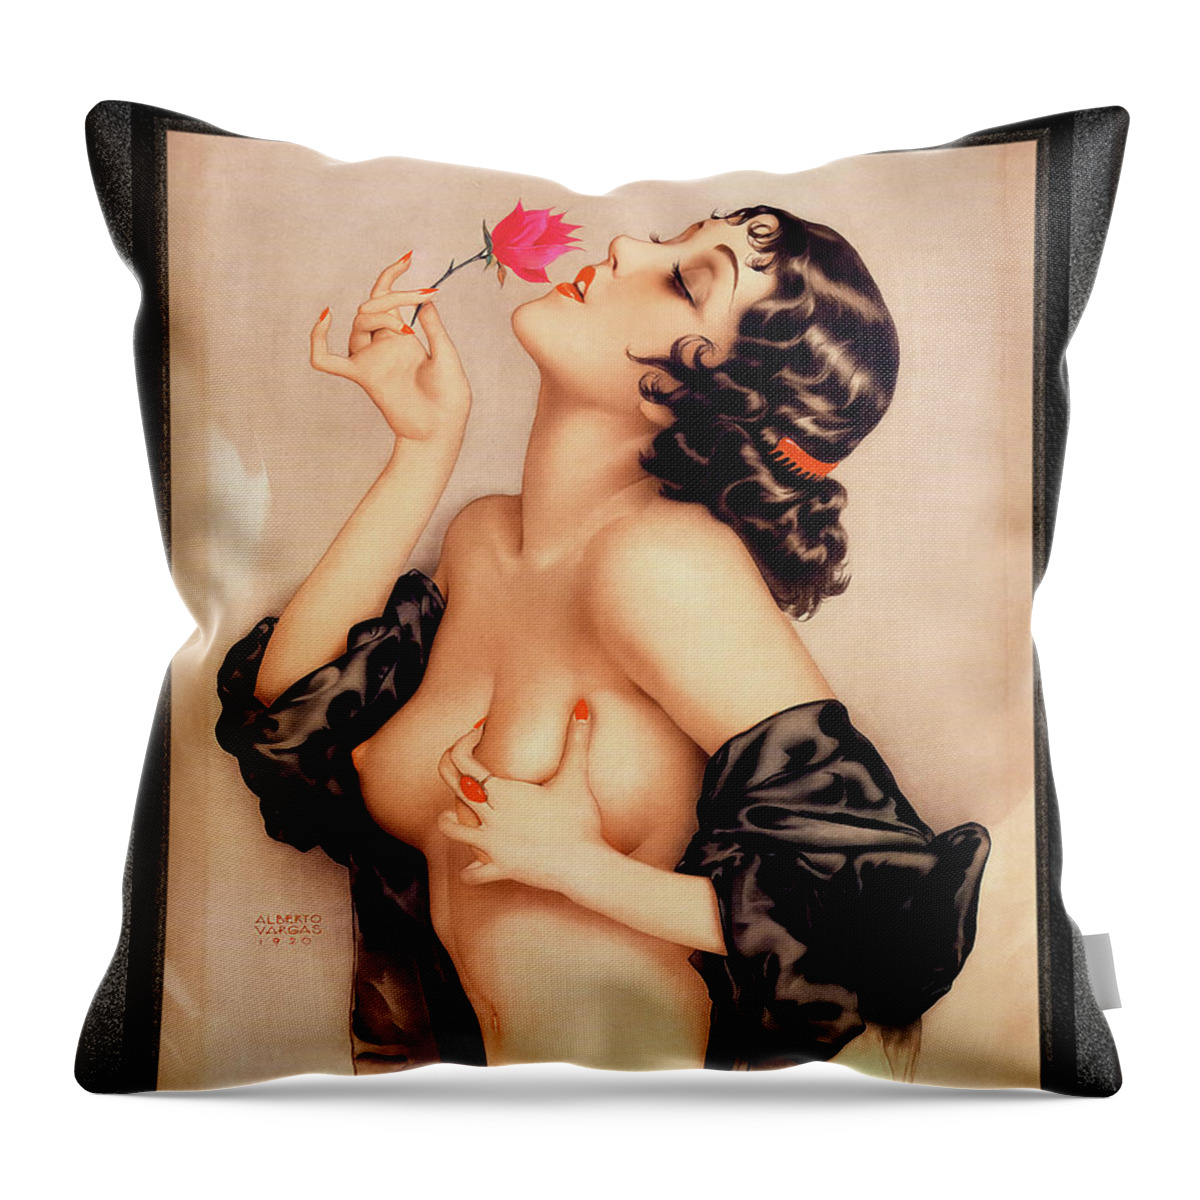 Memories Of Olive Throw Pillow featuring the painting Memories of Olive by Alberto Vargas Vintage Pin-Up Girl Art by Rolando Burbon